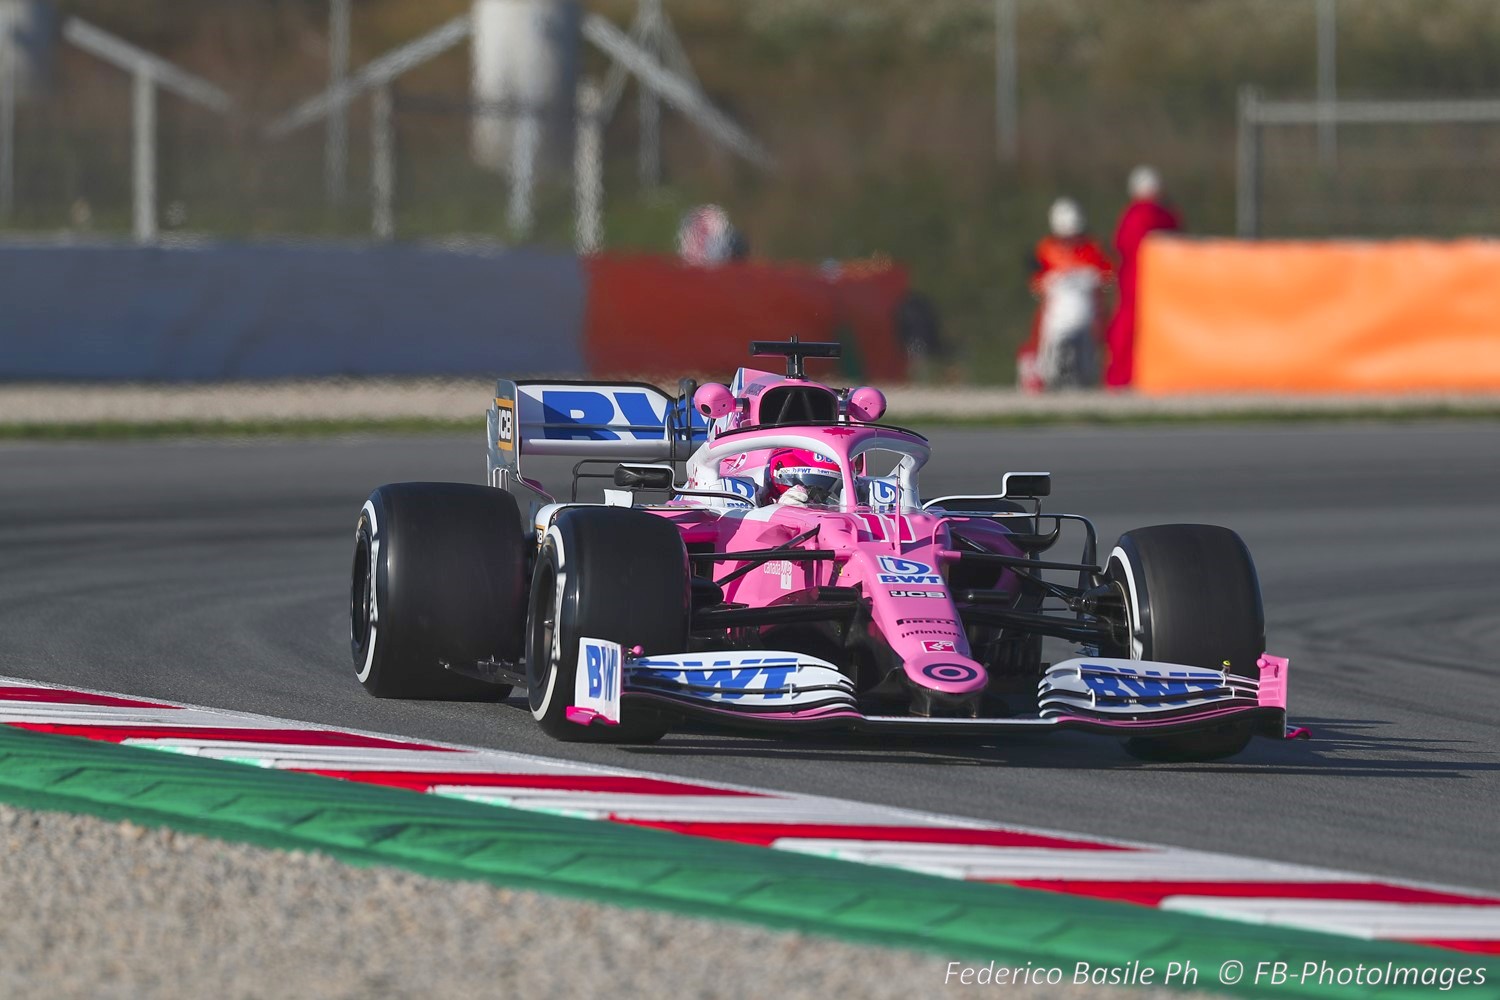 Last year's Mercedes - this year's "pink' Mercedes